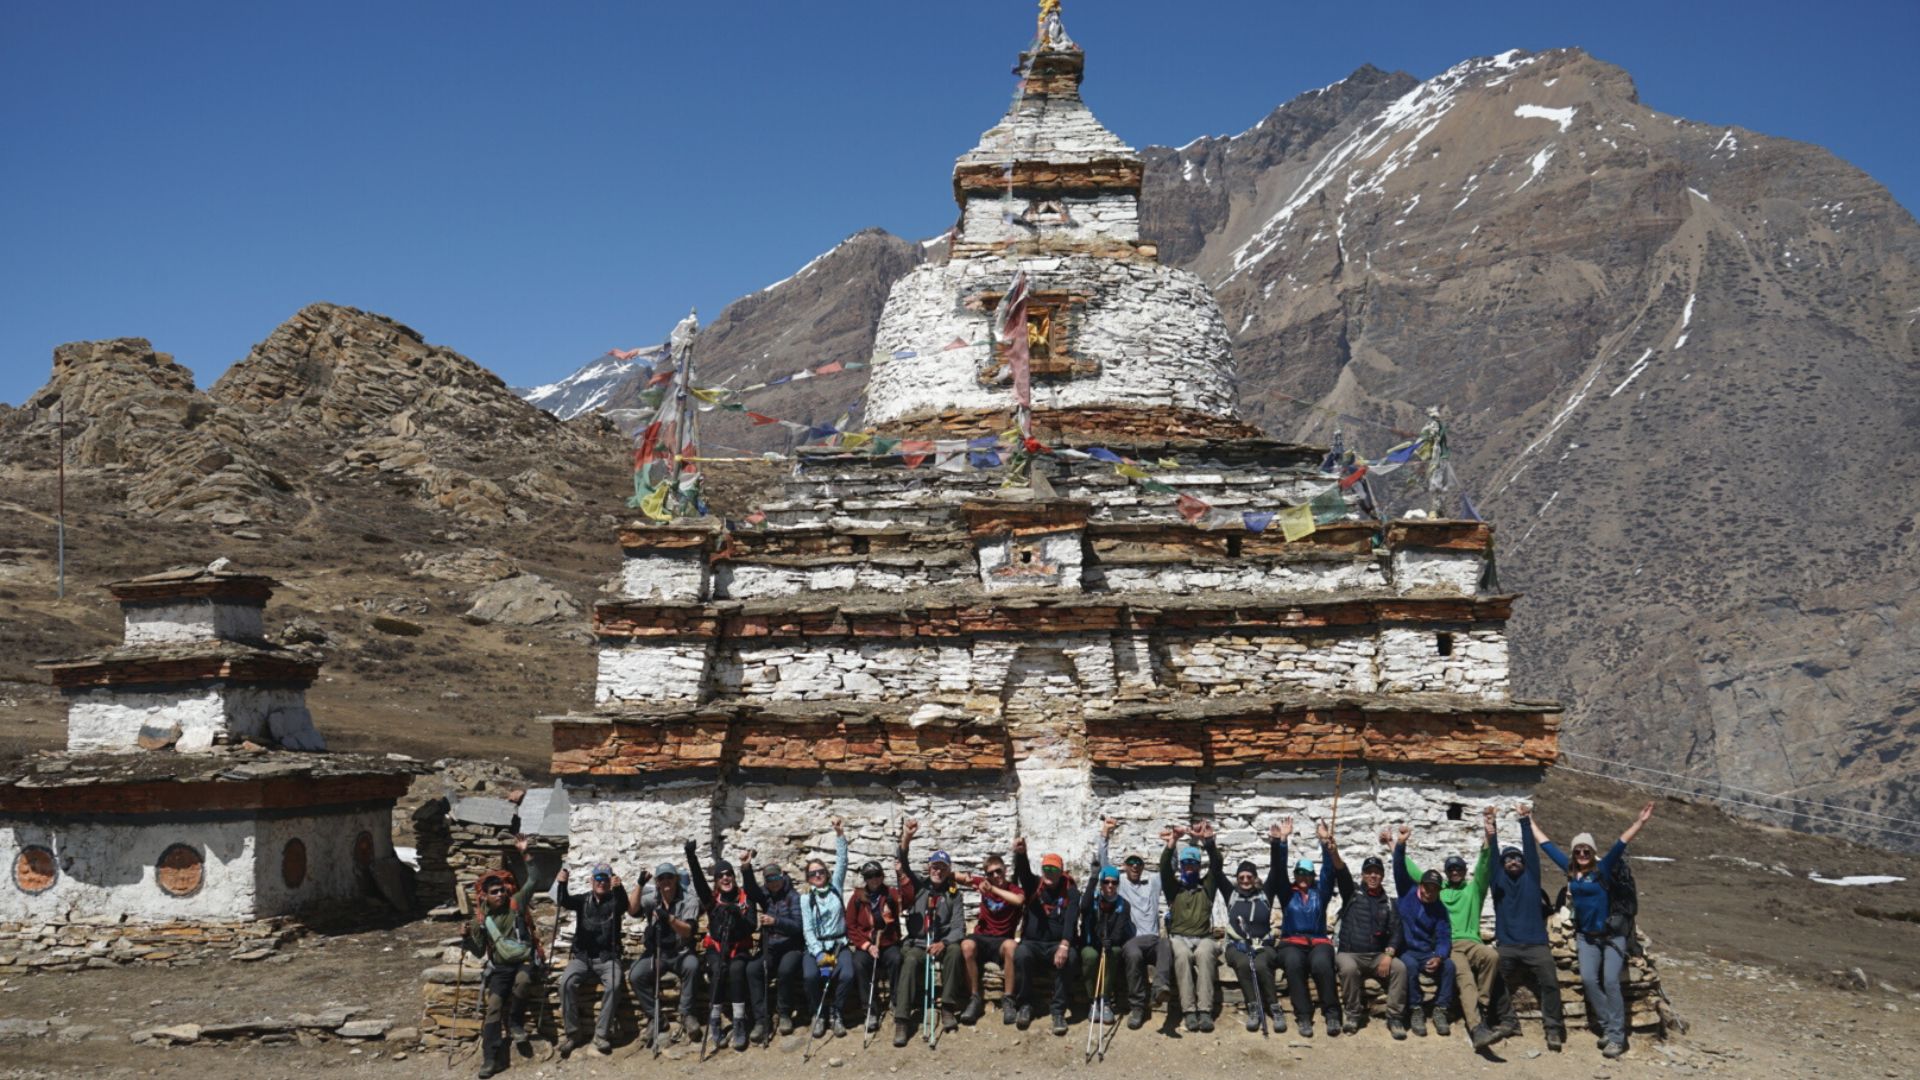 A large group poses in front of a traditional Nepalese structure in the mountains